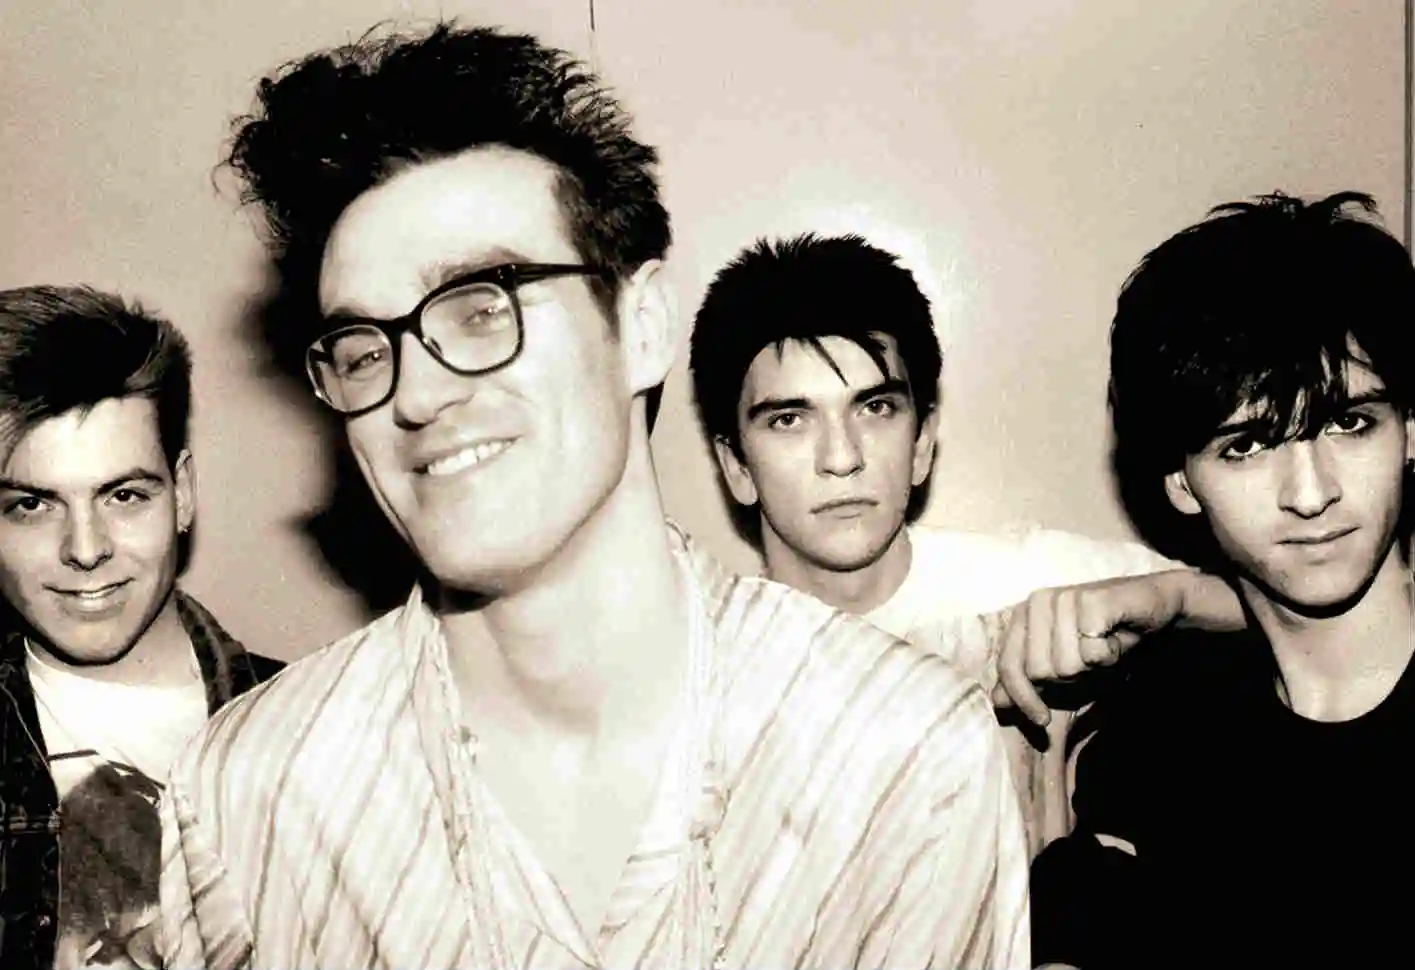 The Smiths, “How Soon Is Now”